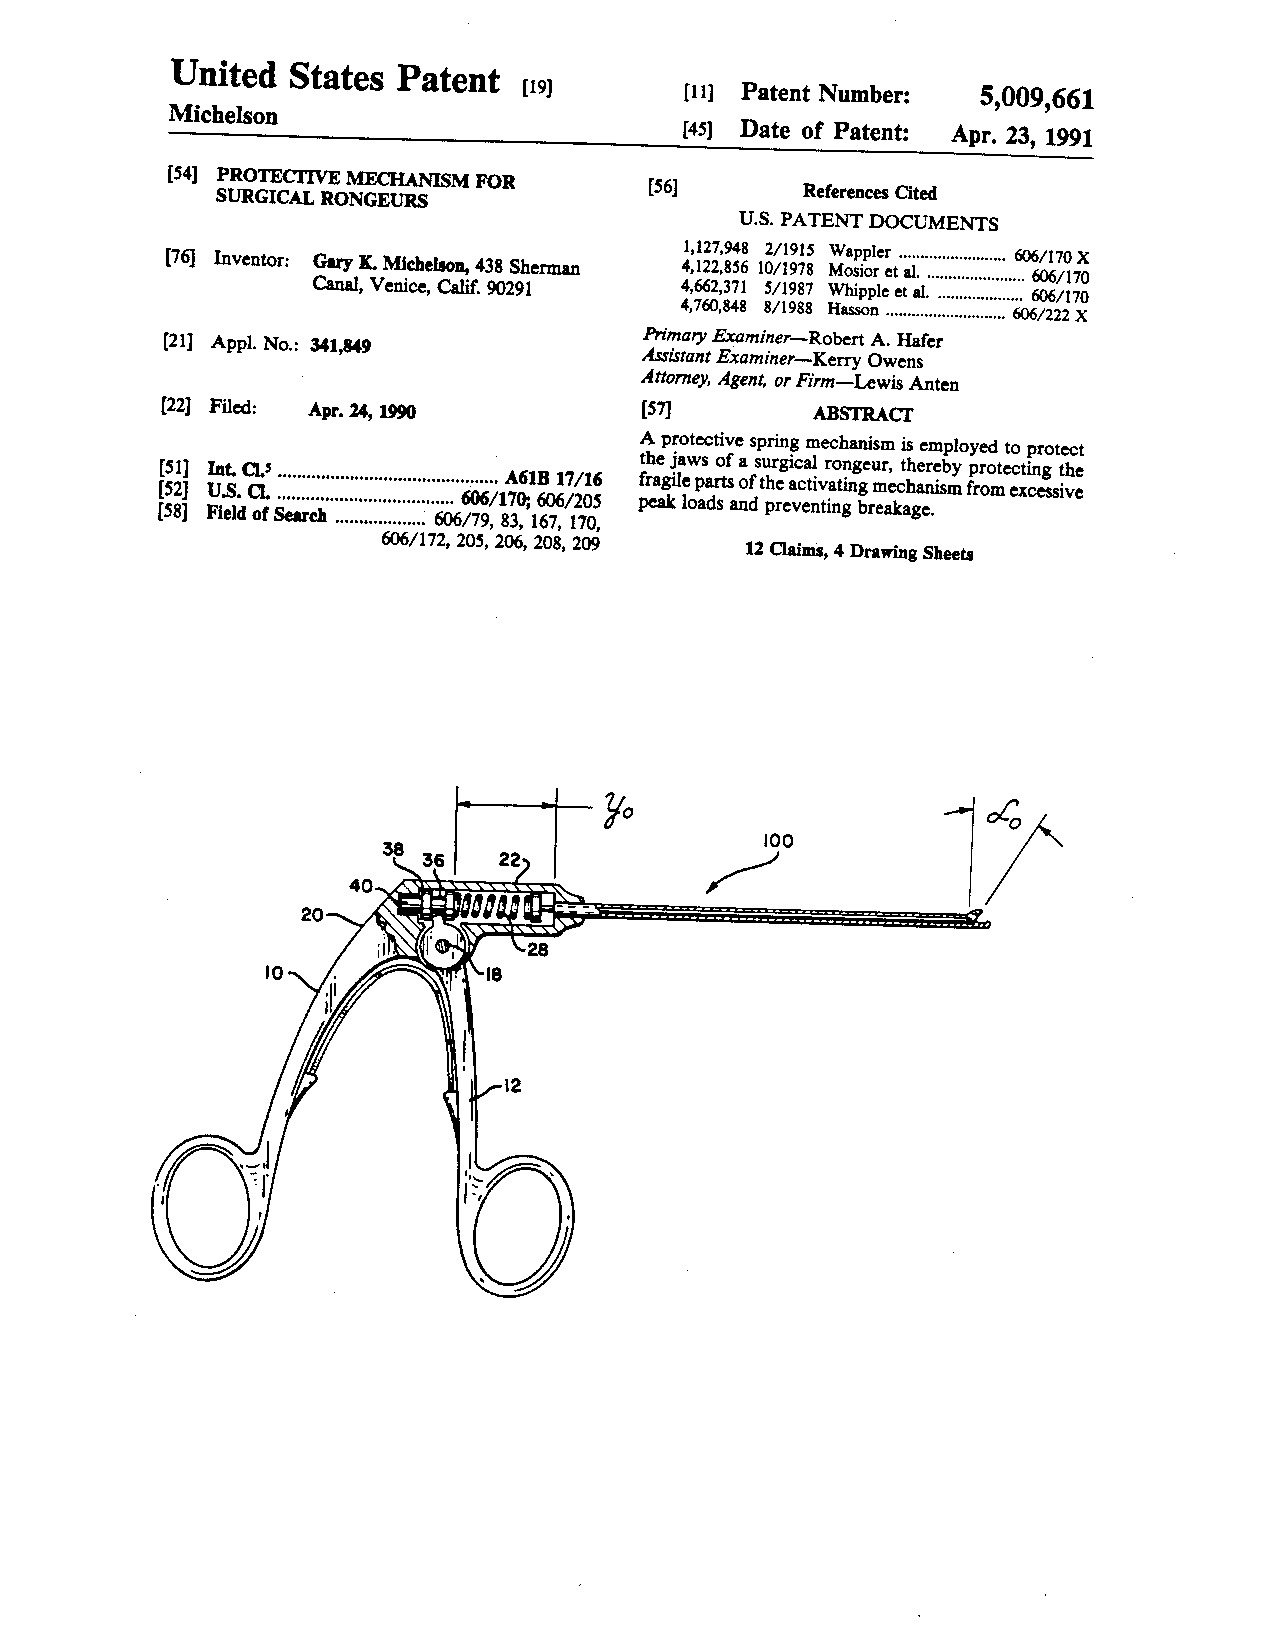 Protective mechanism for surgical rongeurs - Patent 5,009,661